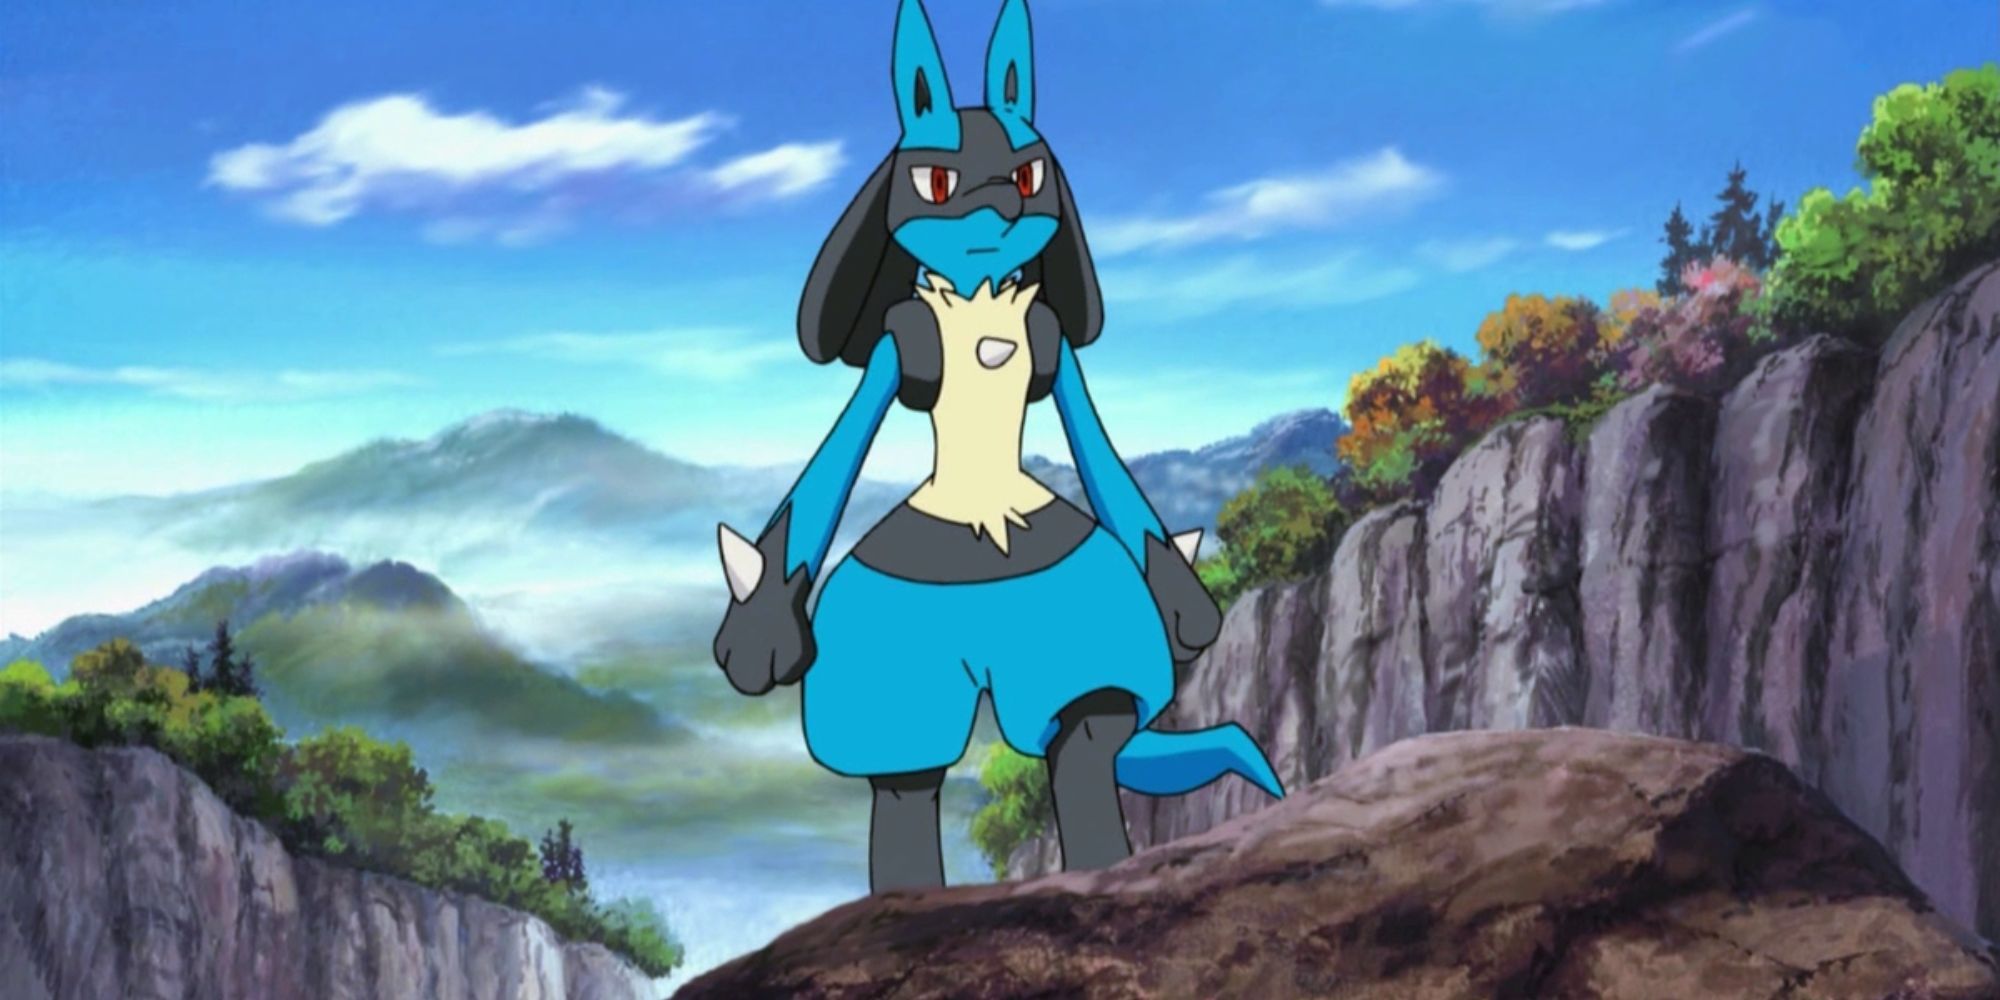 Lucario stands on a rock in front of a mountain